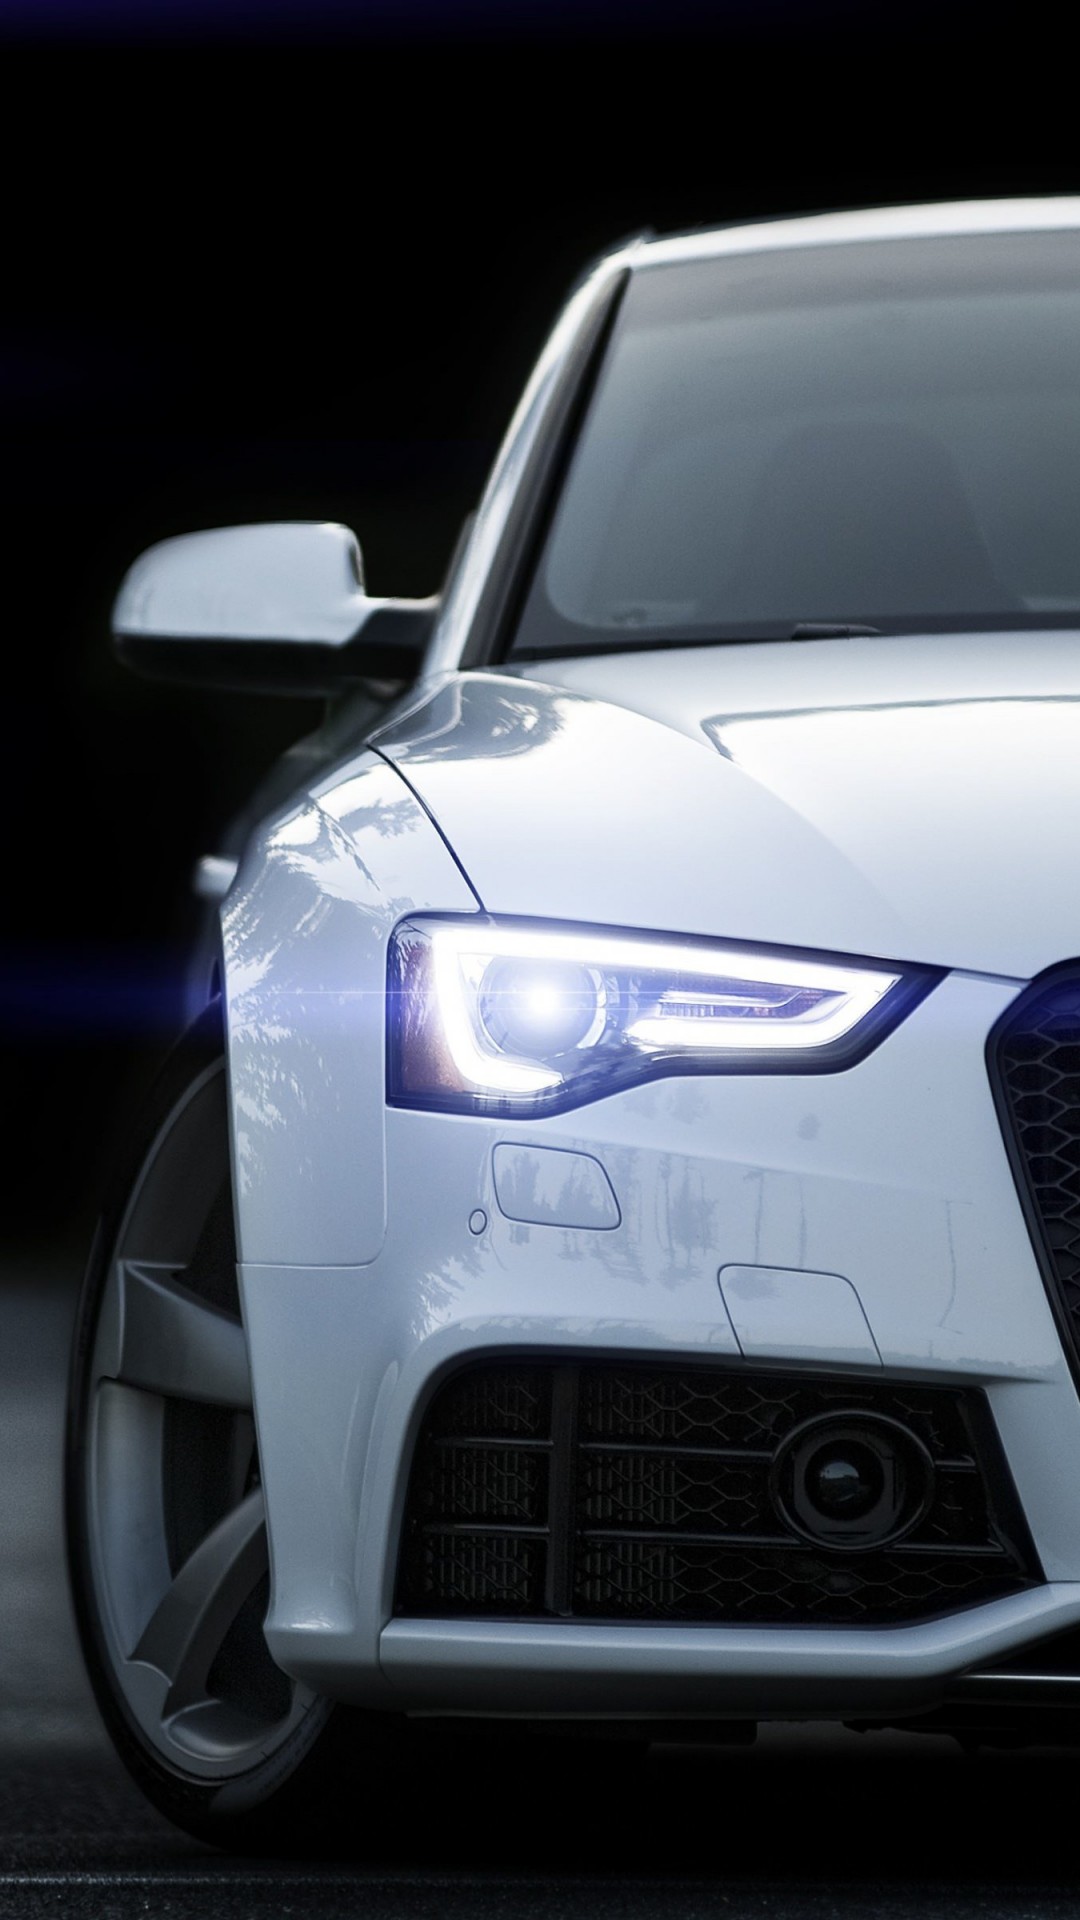 2015 Audi RS 5 Coupe Wallpaper for SAMSUNG Galaxy Note 3